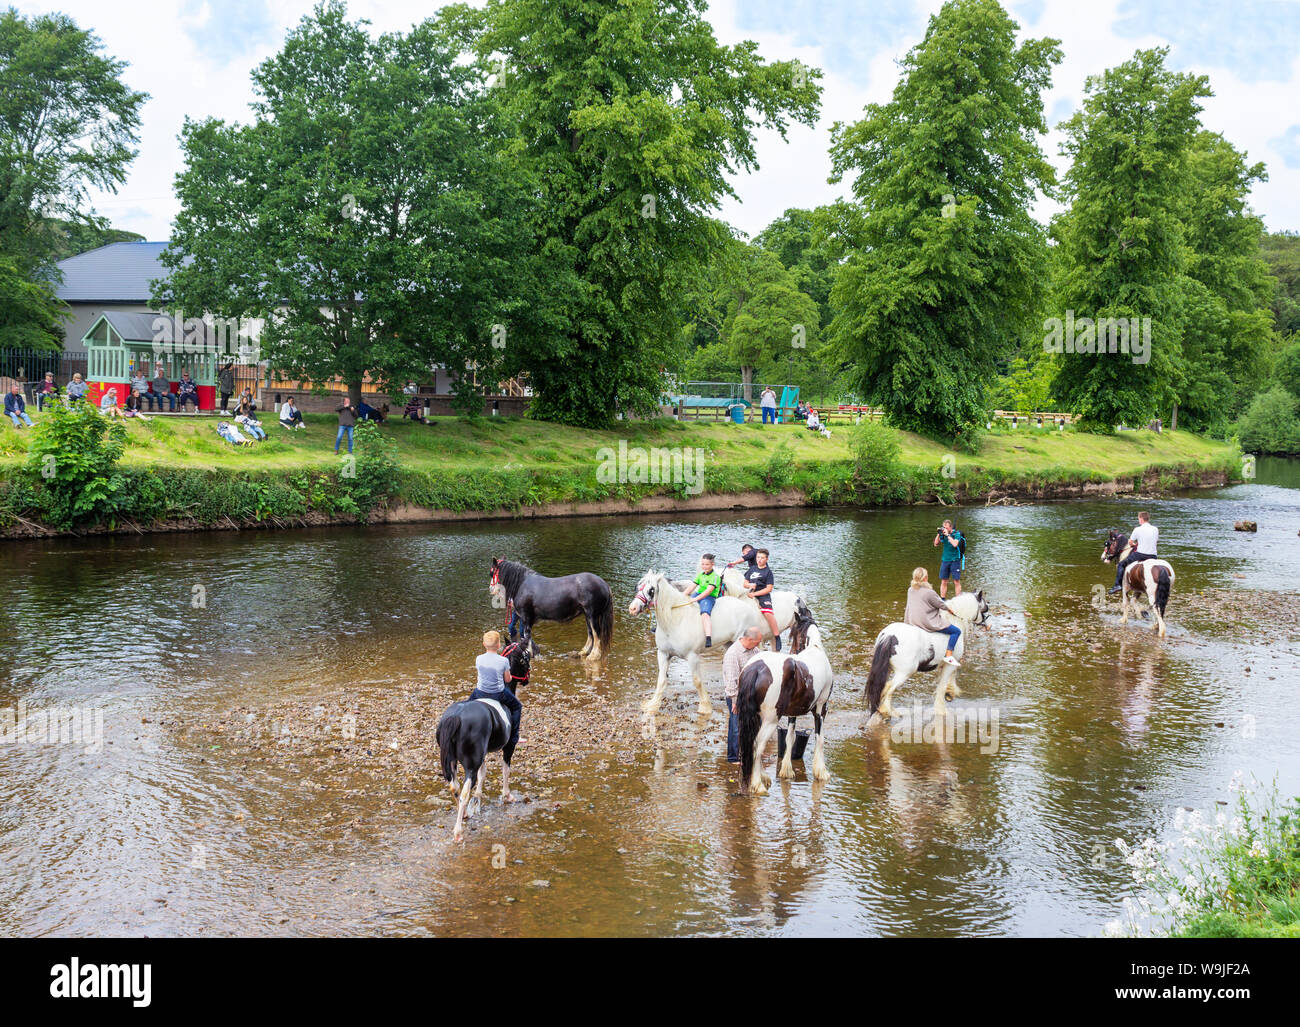 Appleby-in-Westmorland, Cumbria, England.  The Appleby Horse Fair, an annual gathering of Gypsies and Travellers and their horses. Stock Photo